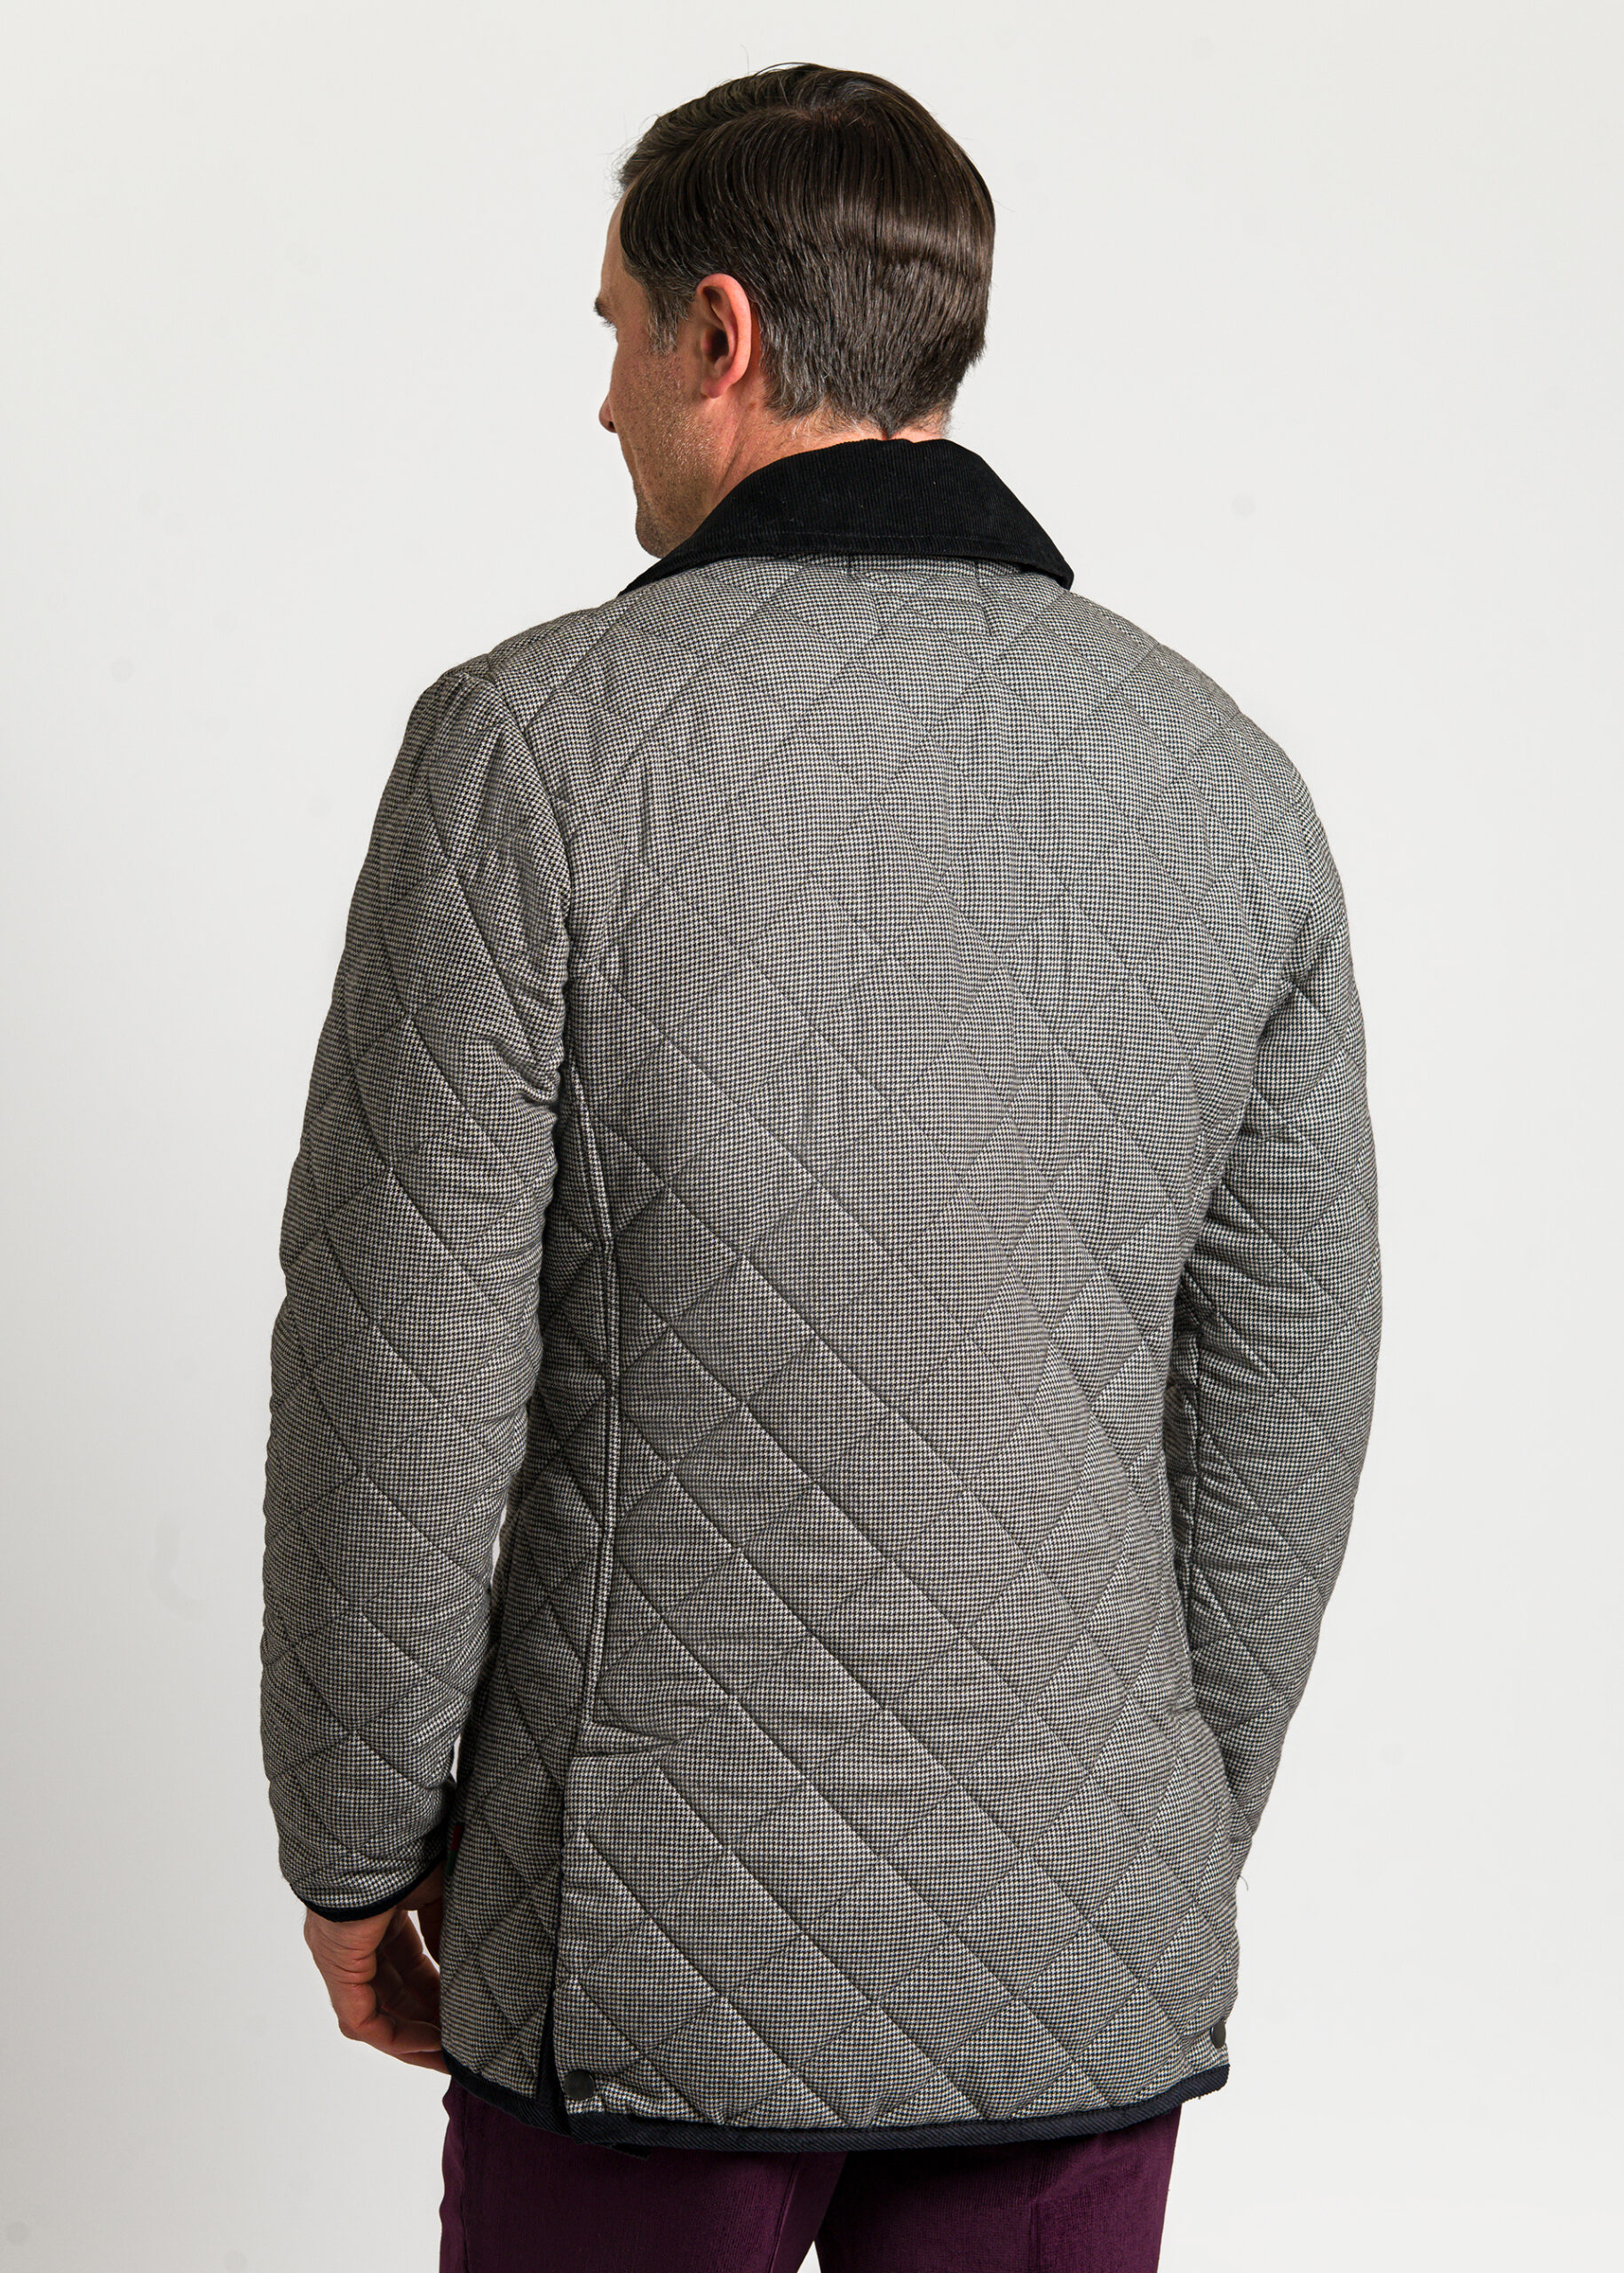 Mens-Quilted-smart-casual-jacket-in-grey